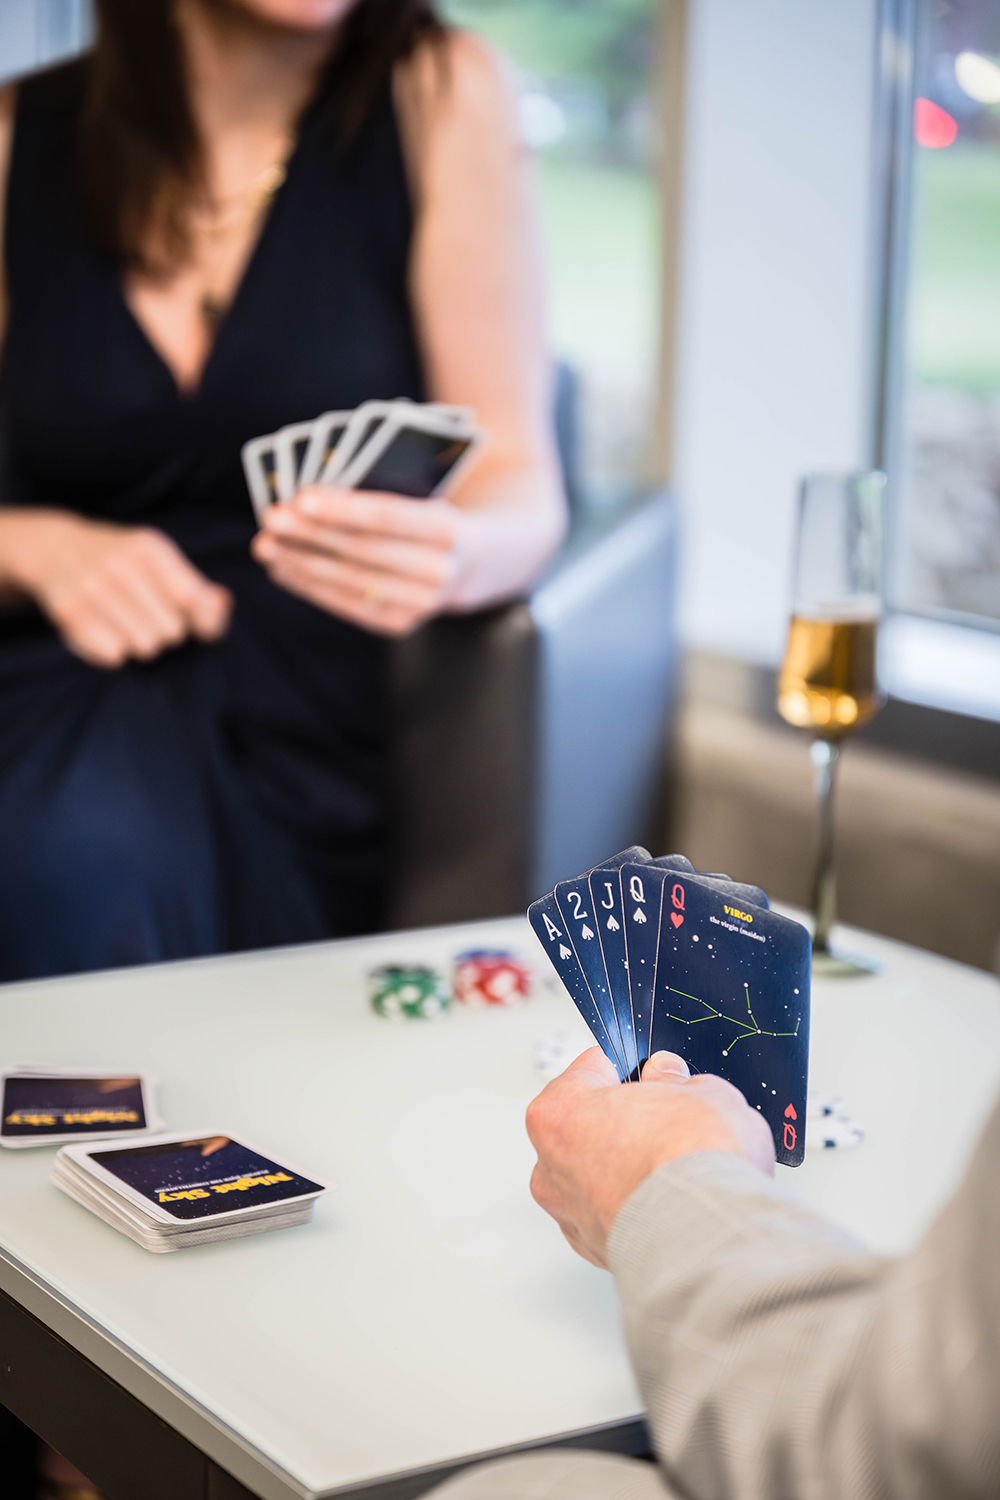 A marrier holds a hand of five cards during a game of five card stud against their partner.